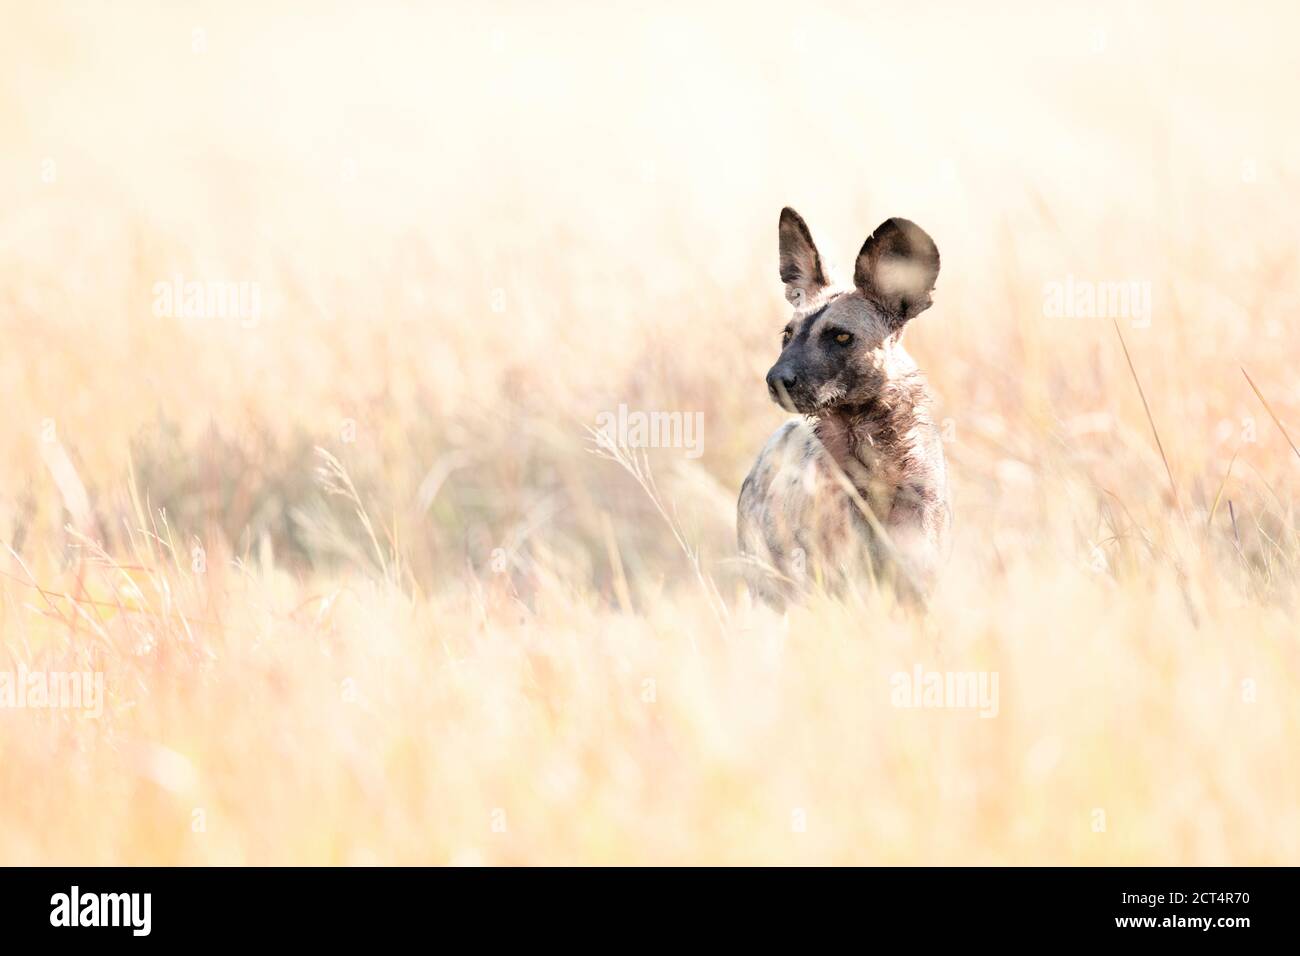 An African Wild dog in long grass Stock Photo